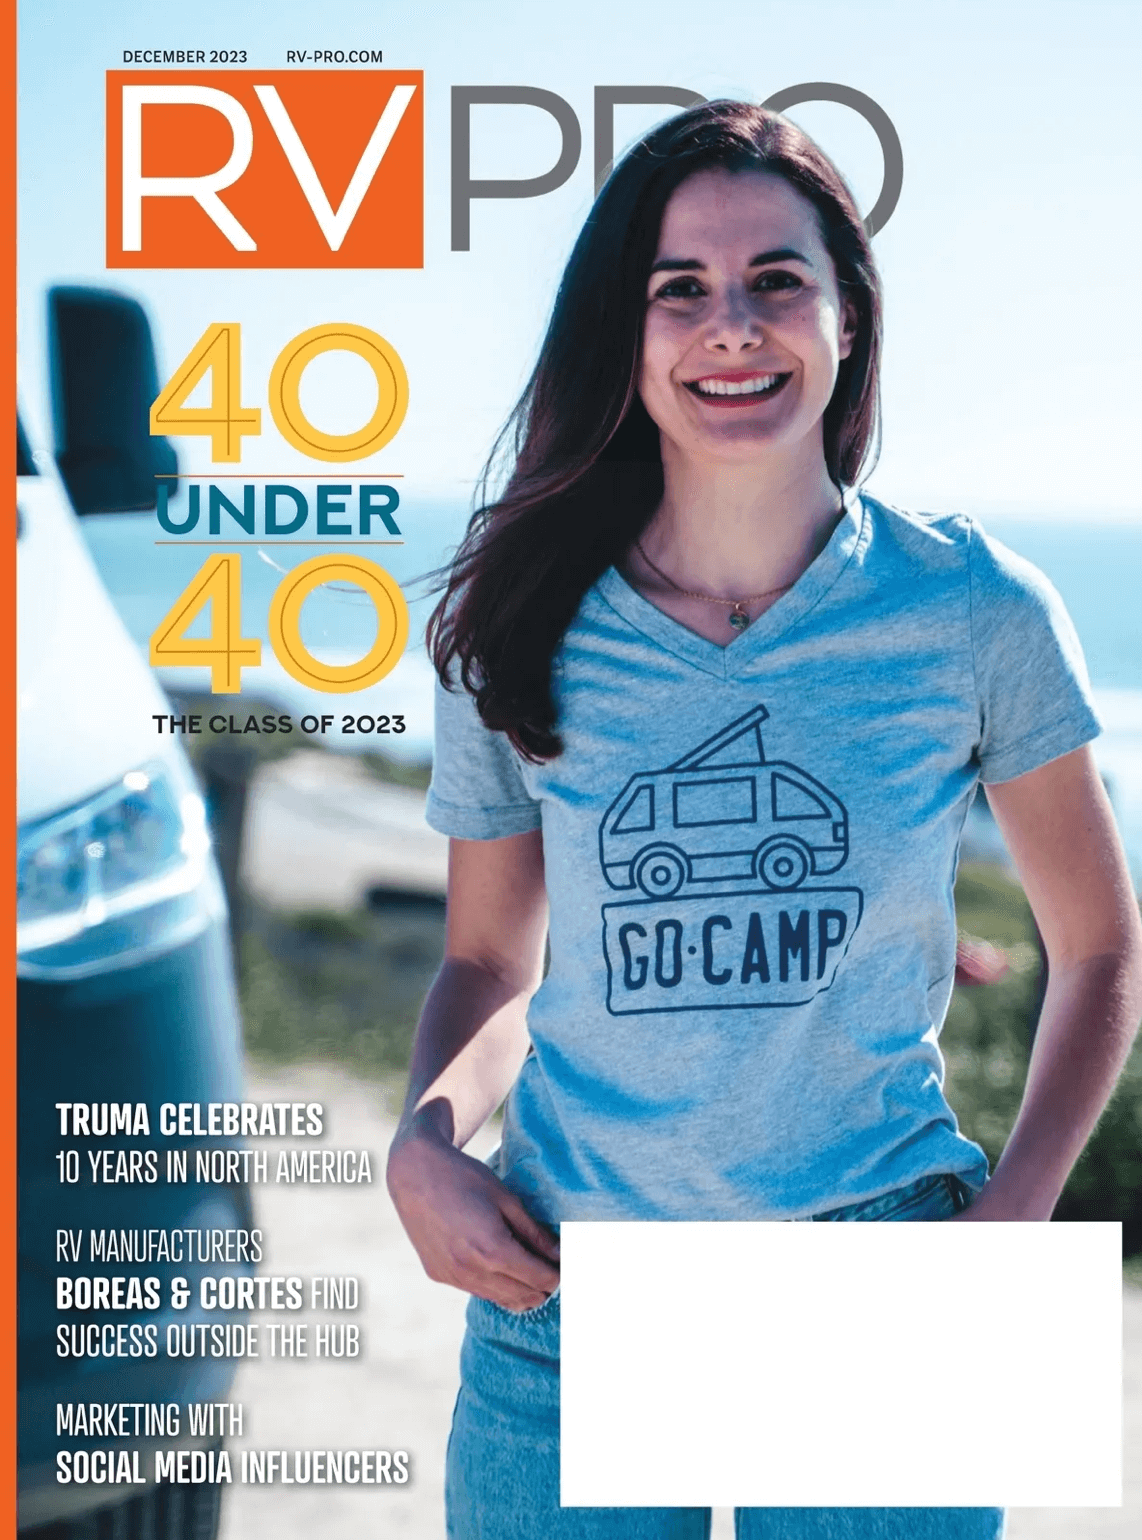 Woman on RV PRO magazine cover, featuring 40 under 40.